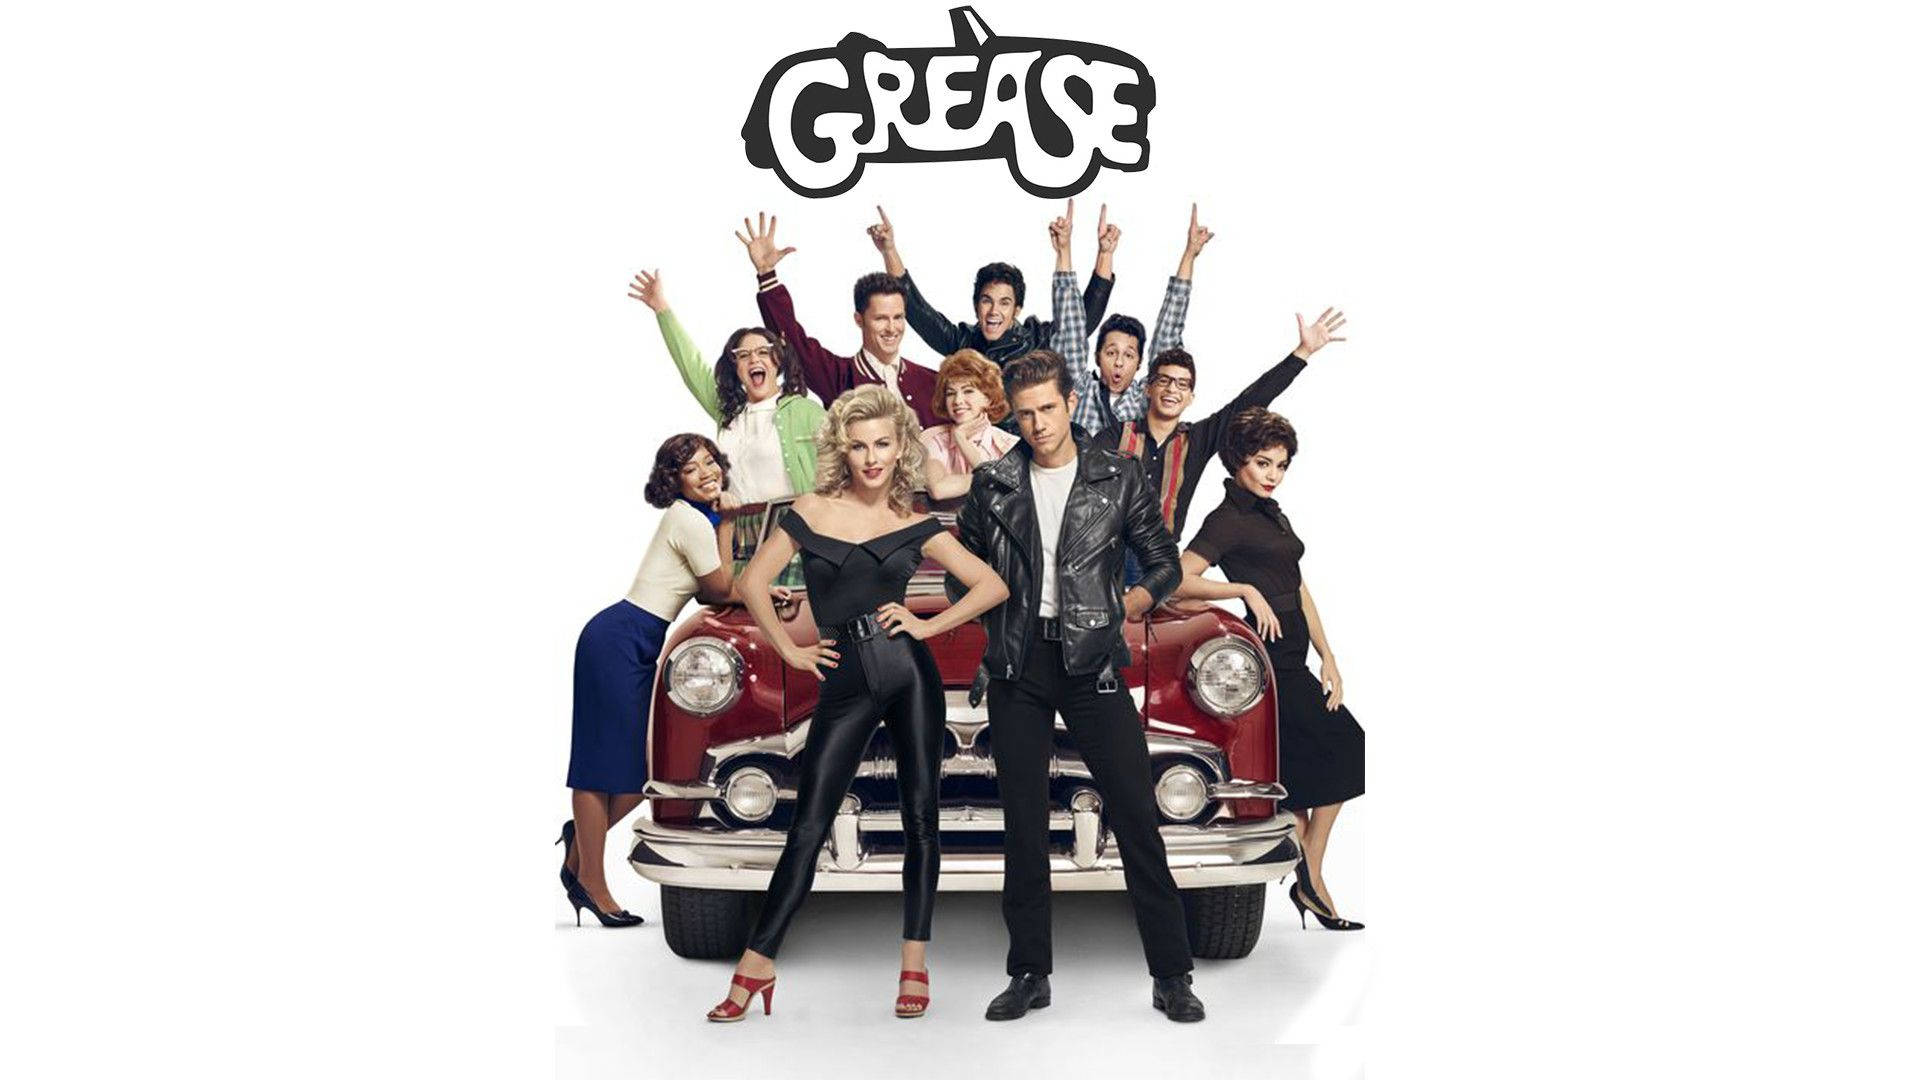 Iconic Poster of the Grease Movie Remake Wallpaper